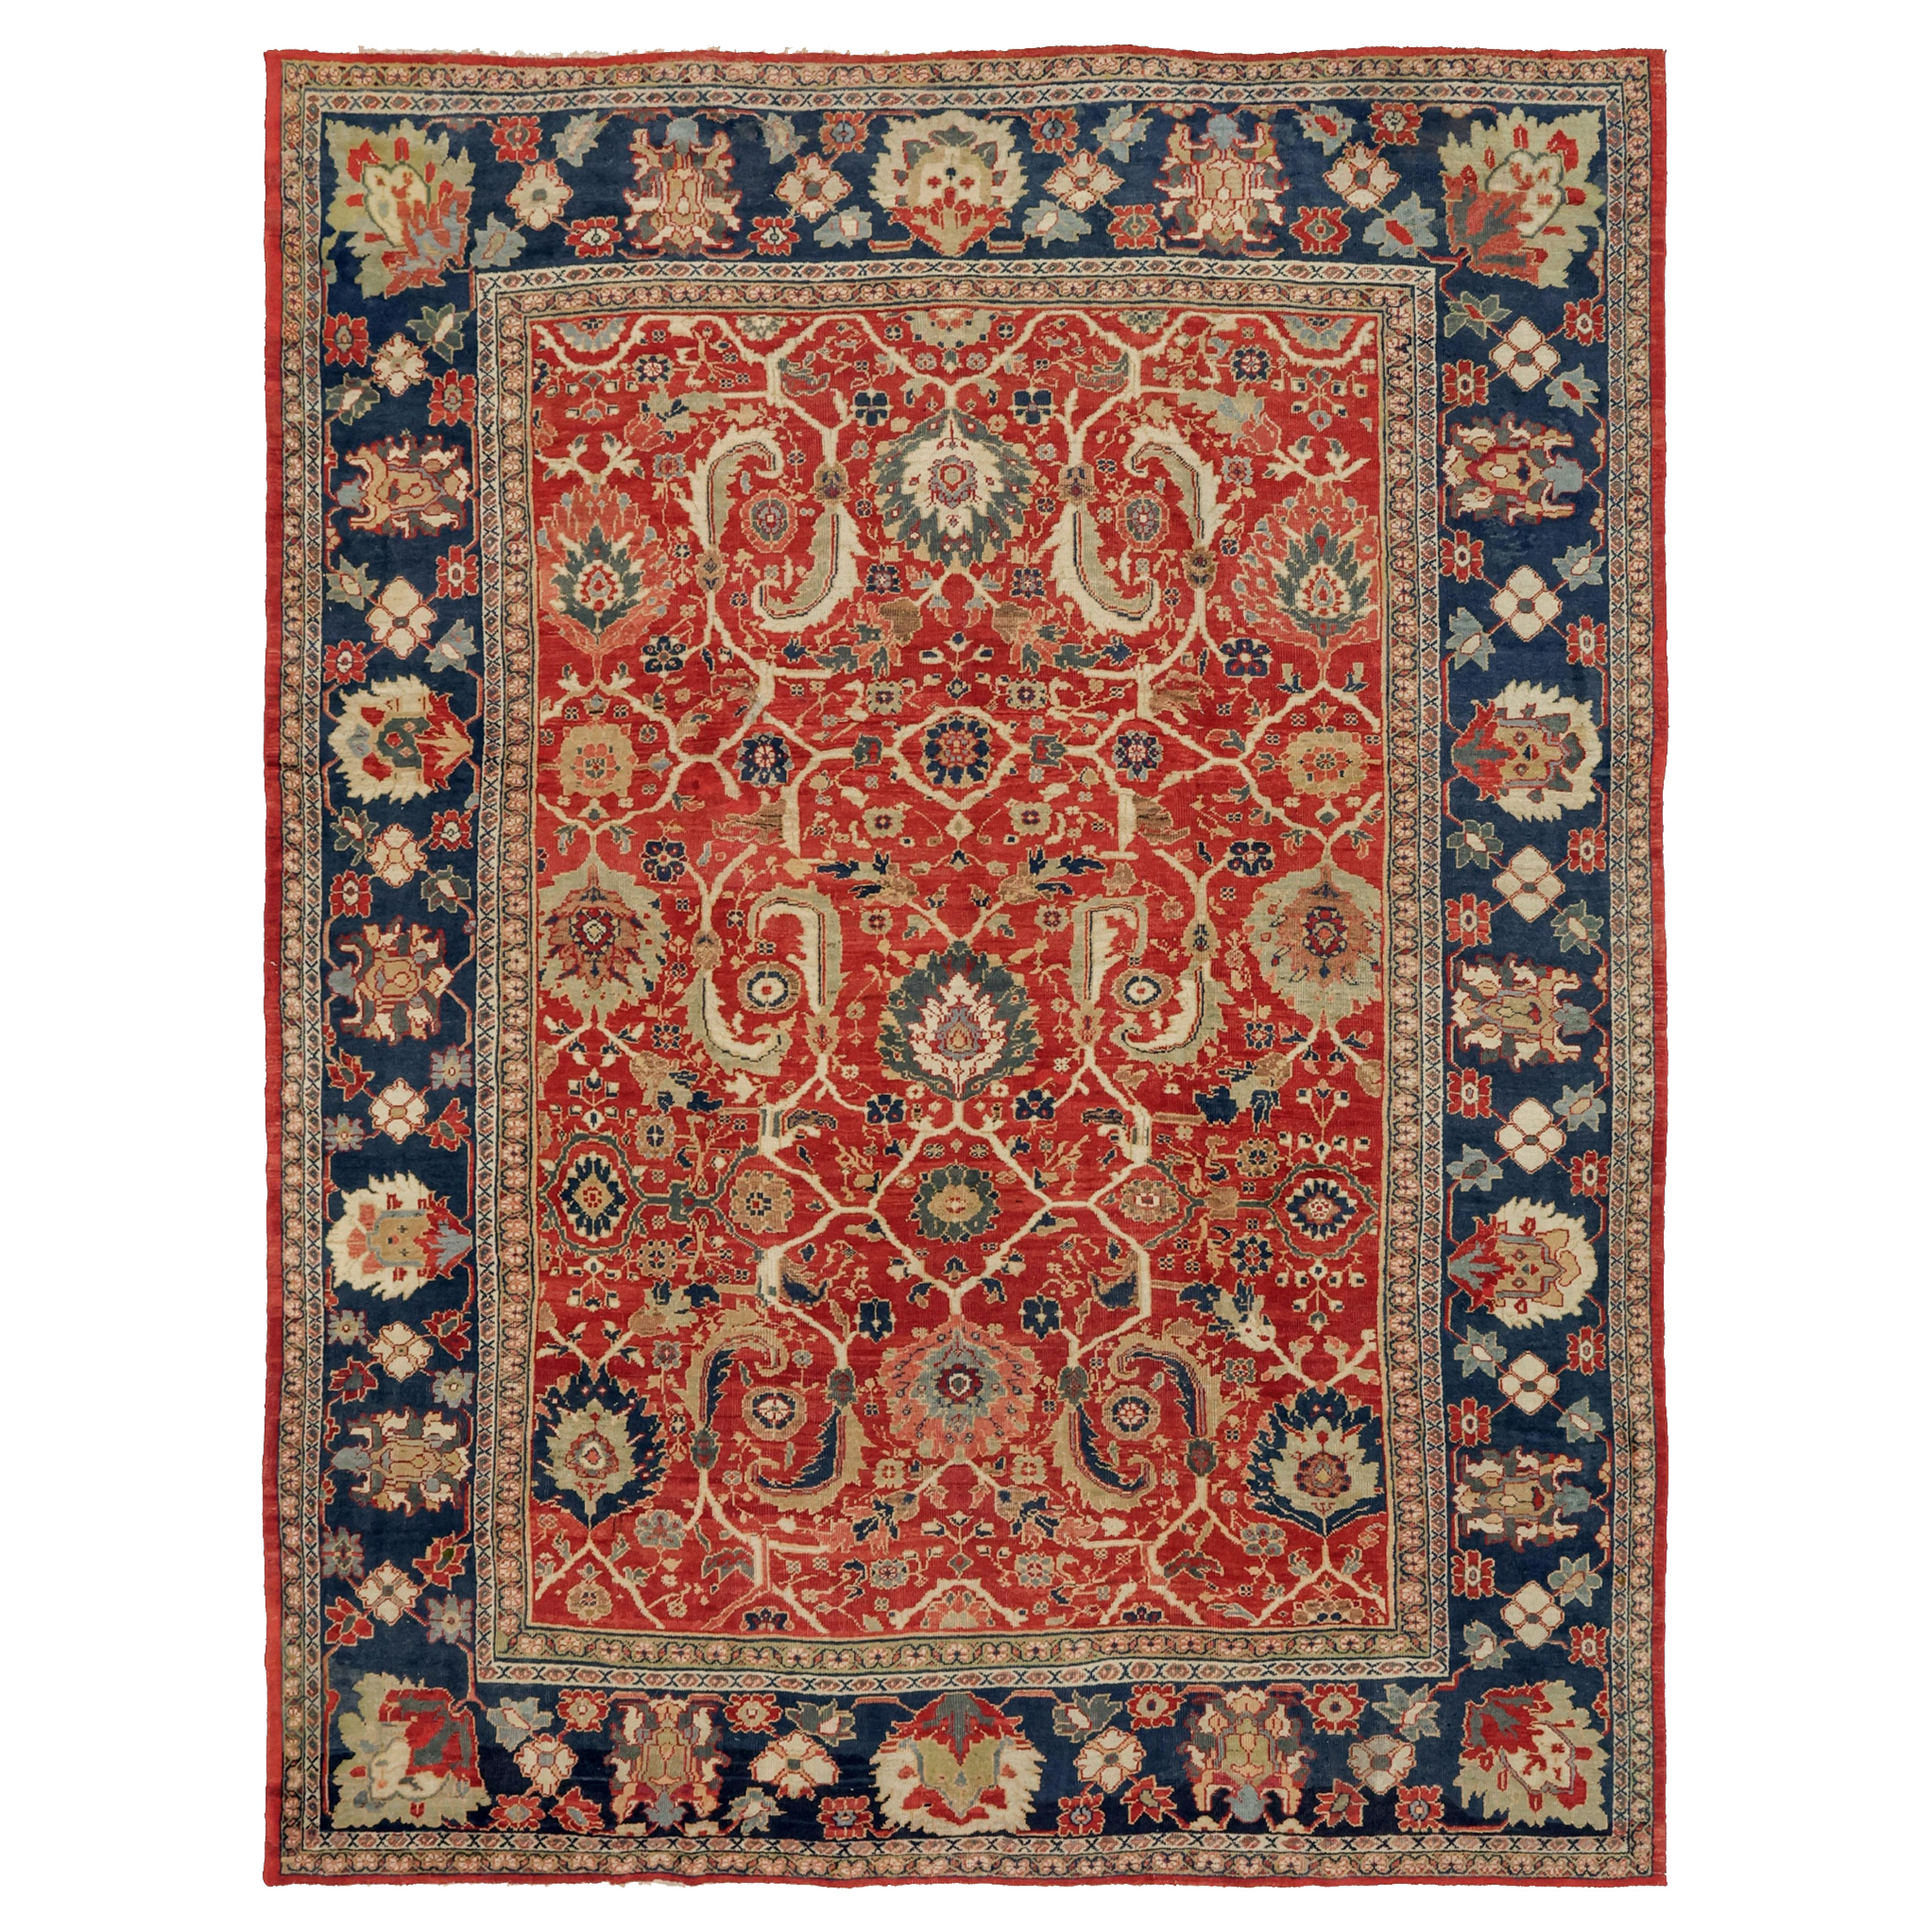 An over size antique Persian Mahal carpet probably commissioned by the Anglo-Swiss firm Ziegler & Co., circa 1900. The red field is decorated with leaves and palettes and framed by a navy blue border. Douglas Stock Gallery is one of America's most selective dealers in antique Persian carpets, antique rugs Boston. antique rugs Brookline, antique rugs Newton, antique rugs Weston, antique rugs Wellesley, antique rugs Natick,MA area